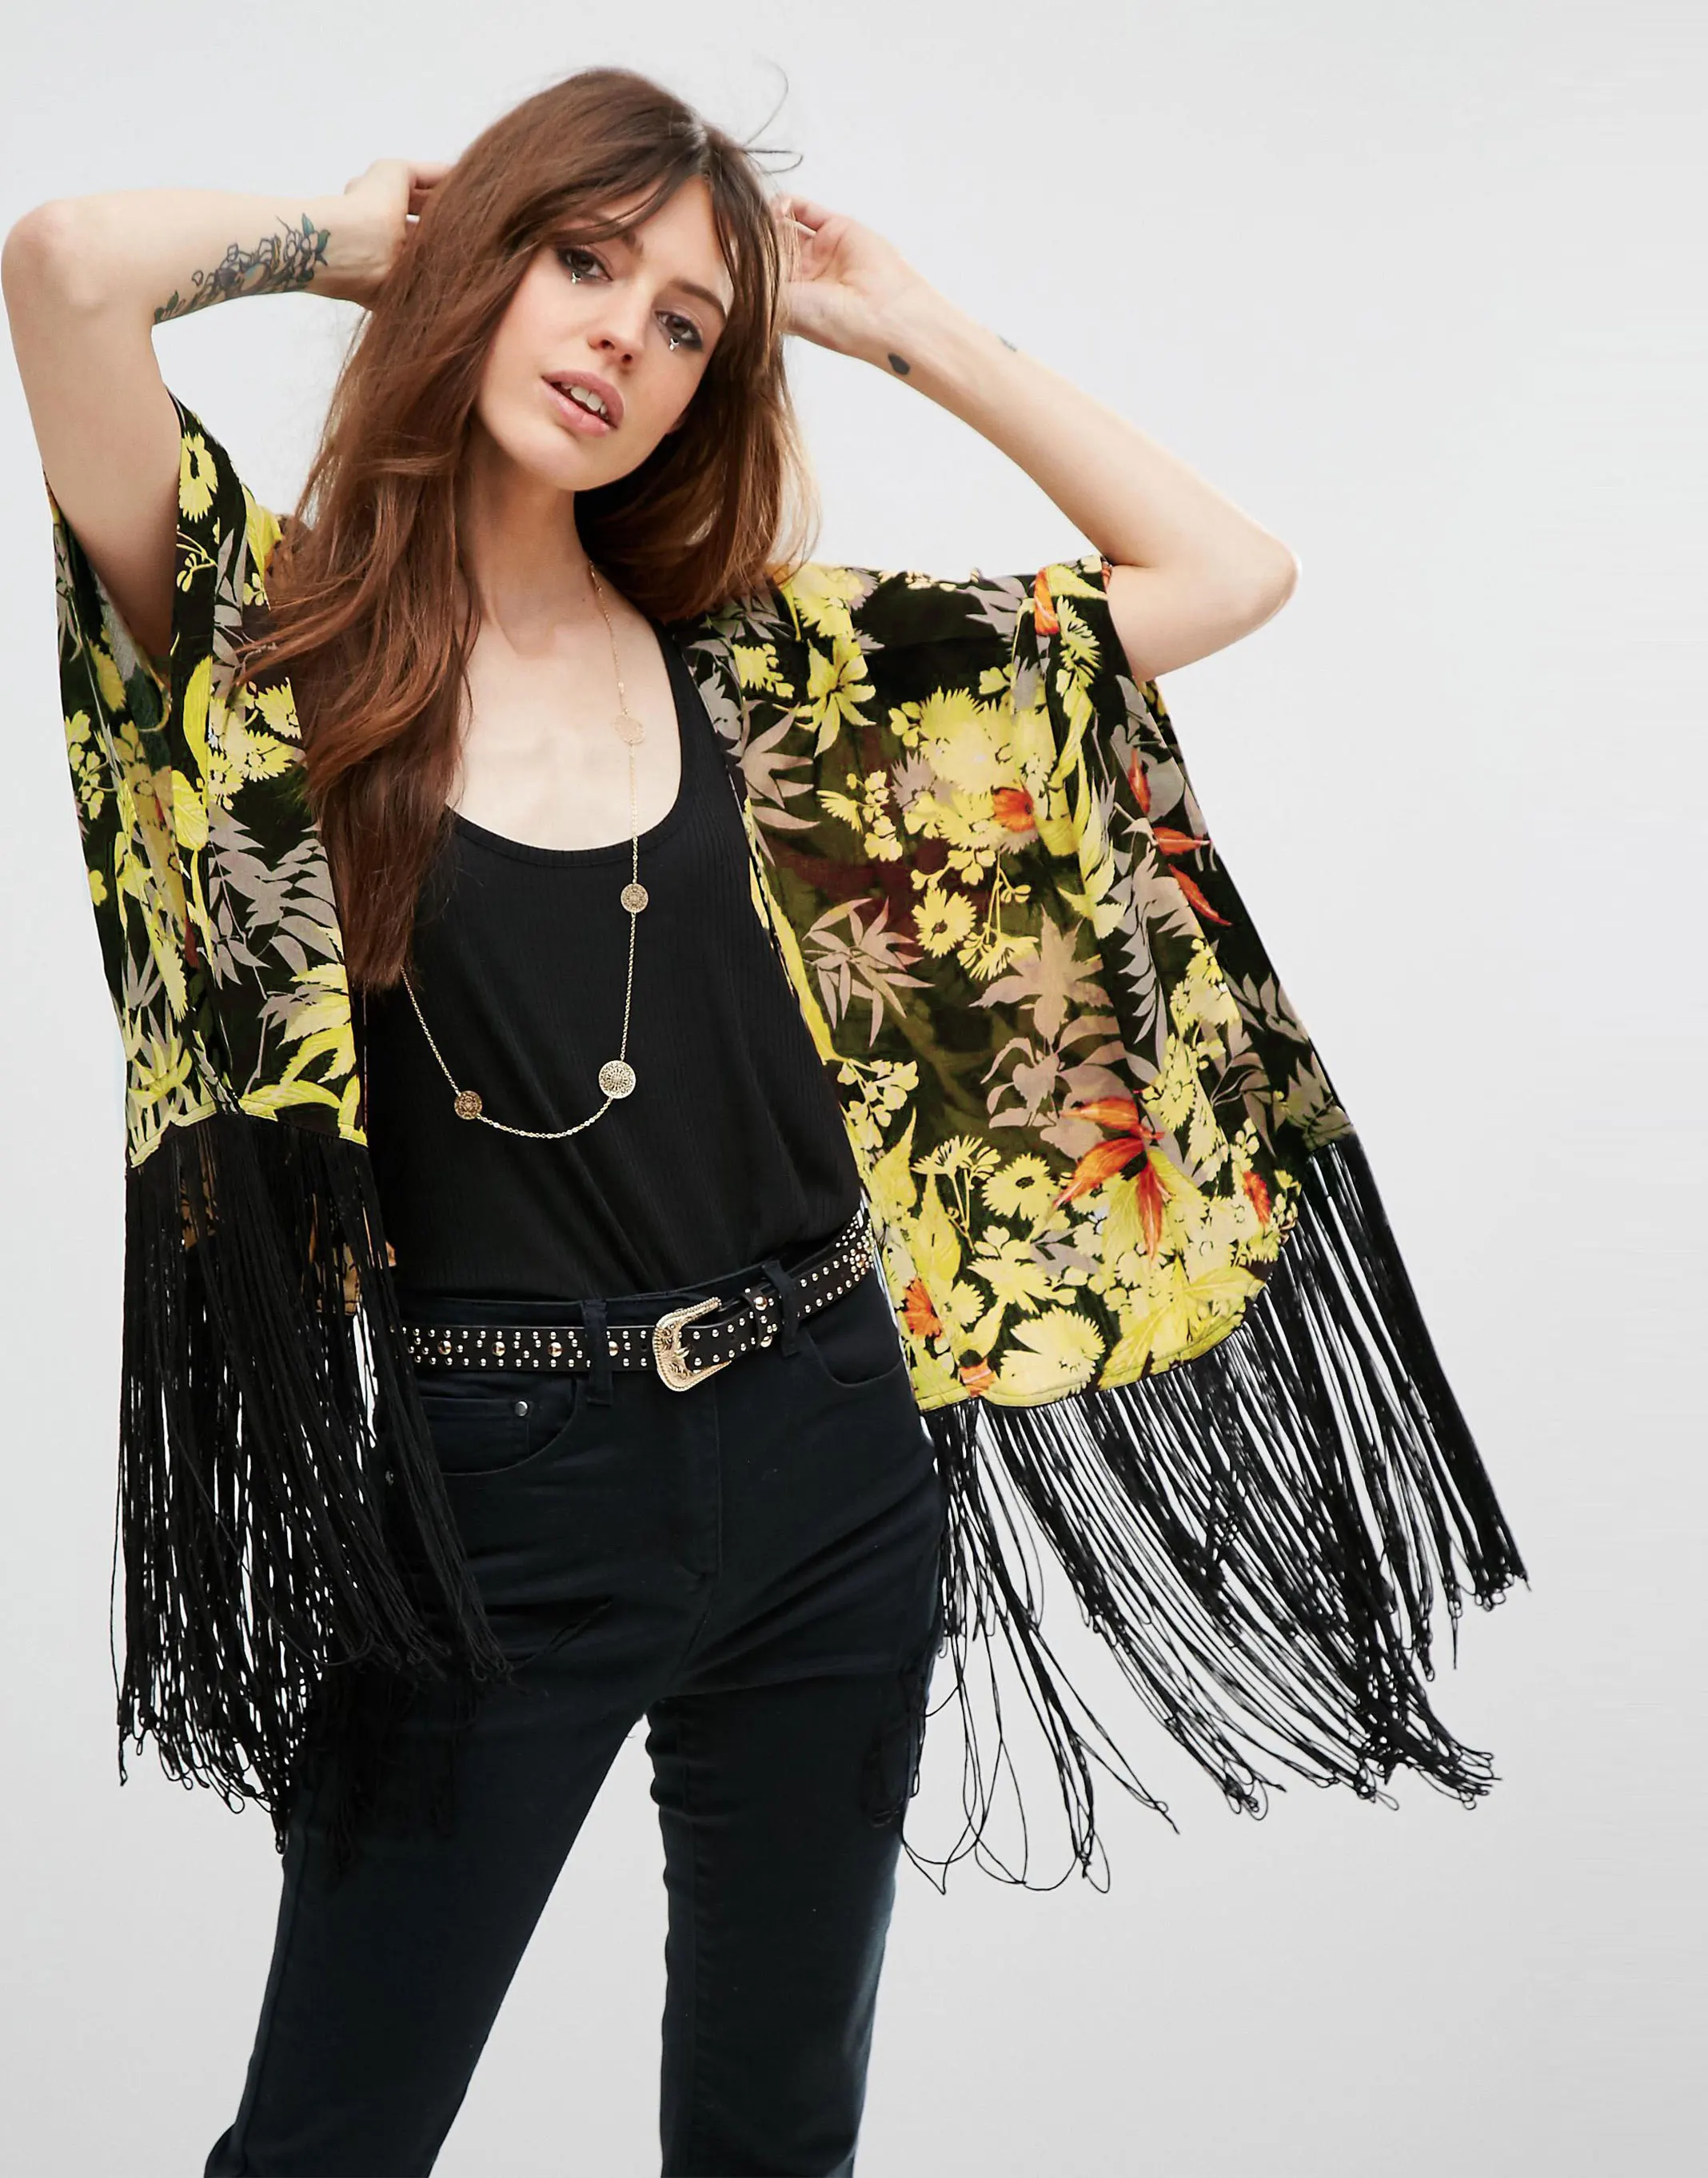 blouses & shirts 2021 Vintage Printed Fringed Tunic Long Kimono Plus Size Sexy Beach Wear Summer Clothing For Women Tops and Blouses Shirts  A799 ladies shirts